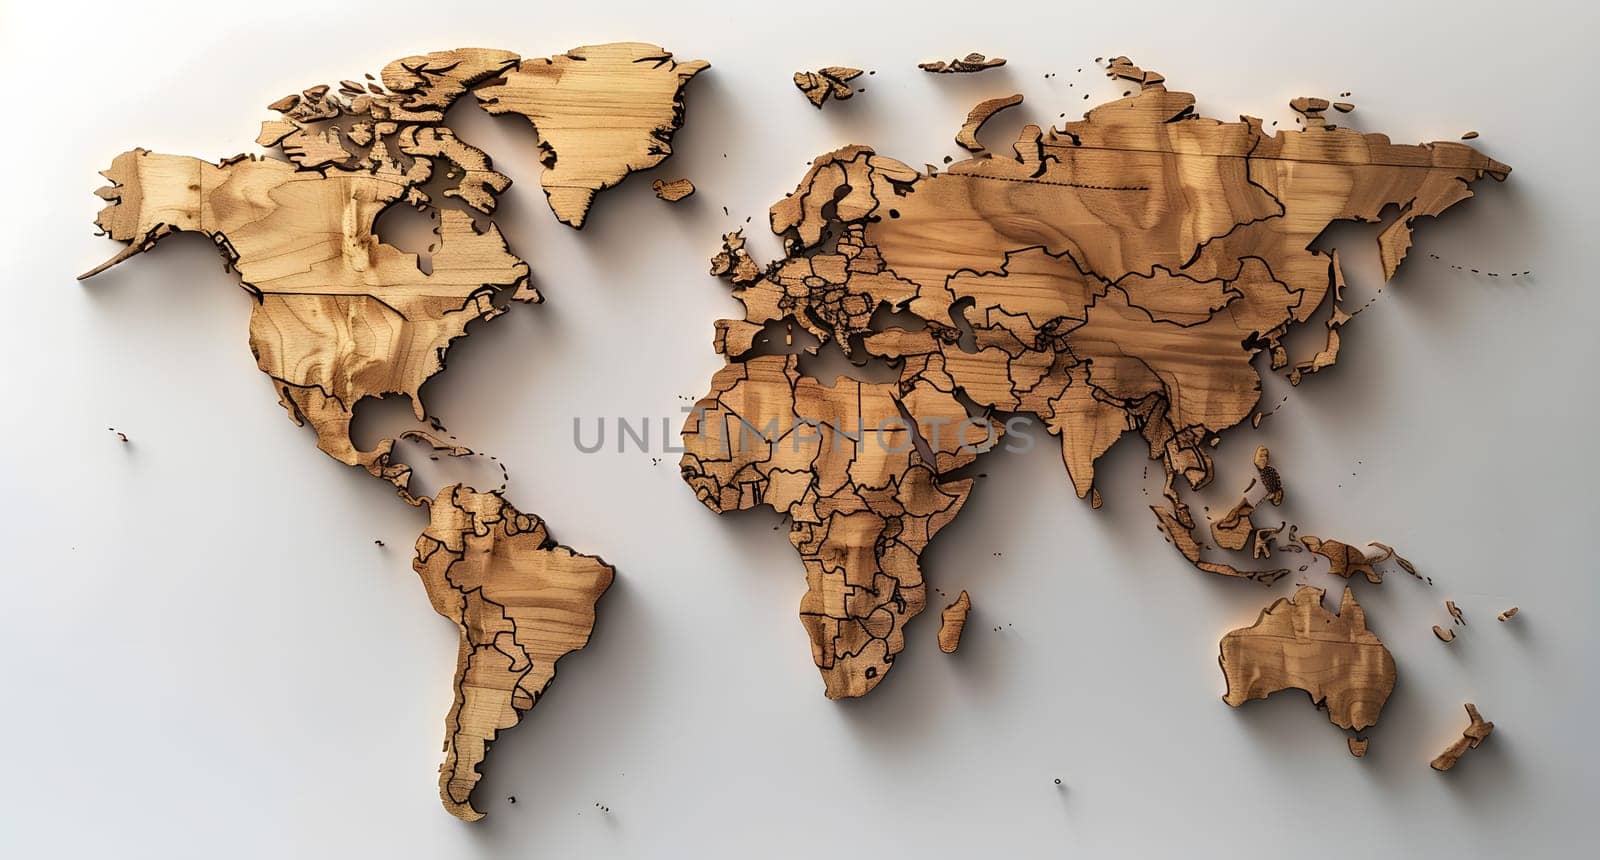 A wooden map of the world decorates the white wall, creating a unique backdrop for exploring global cuisine and ingredients